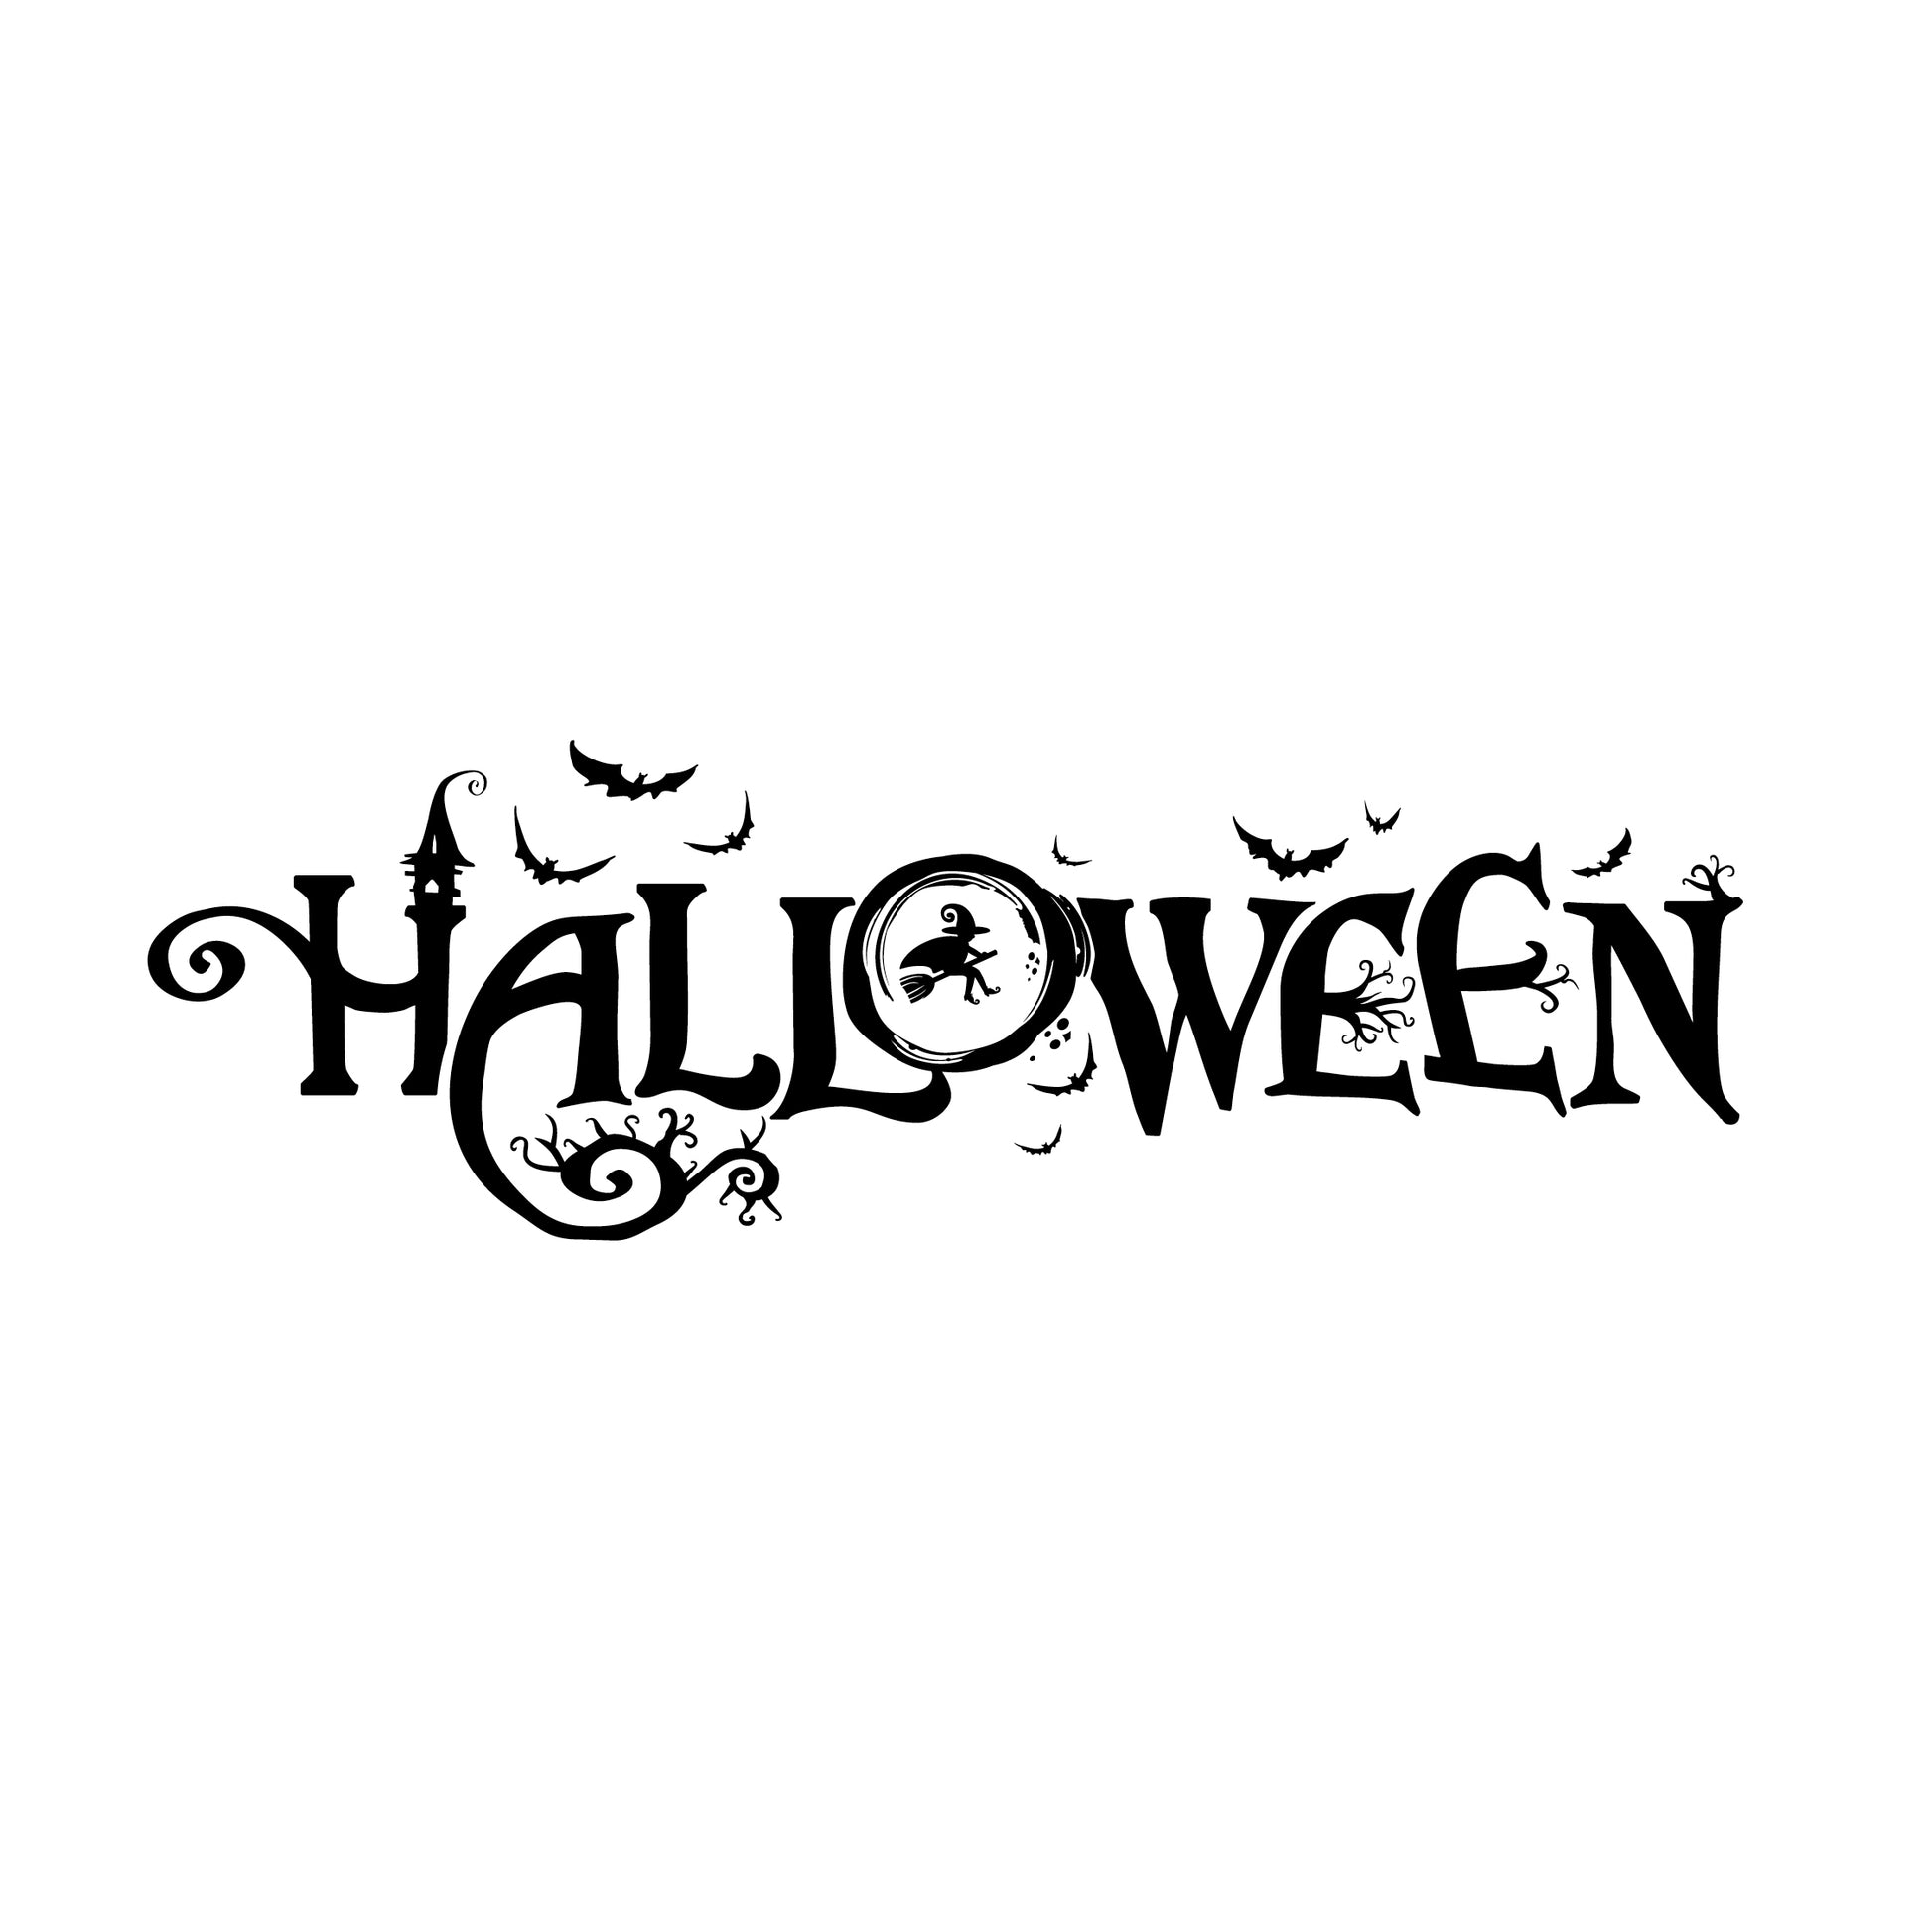 Spooky large halloween wall sticker decal design